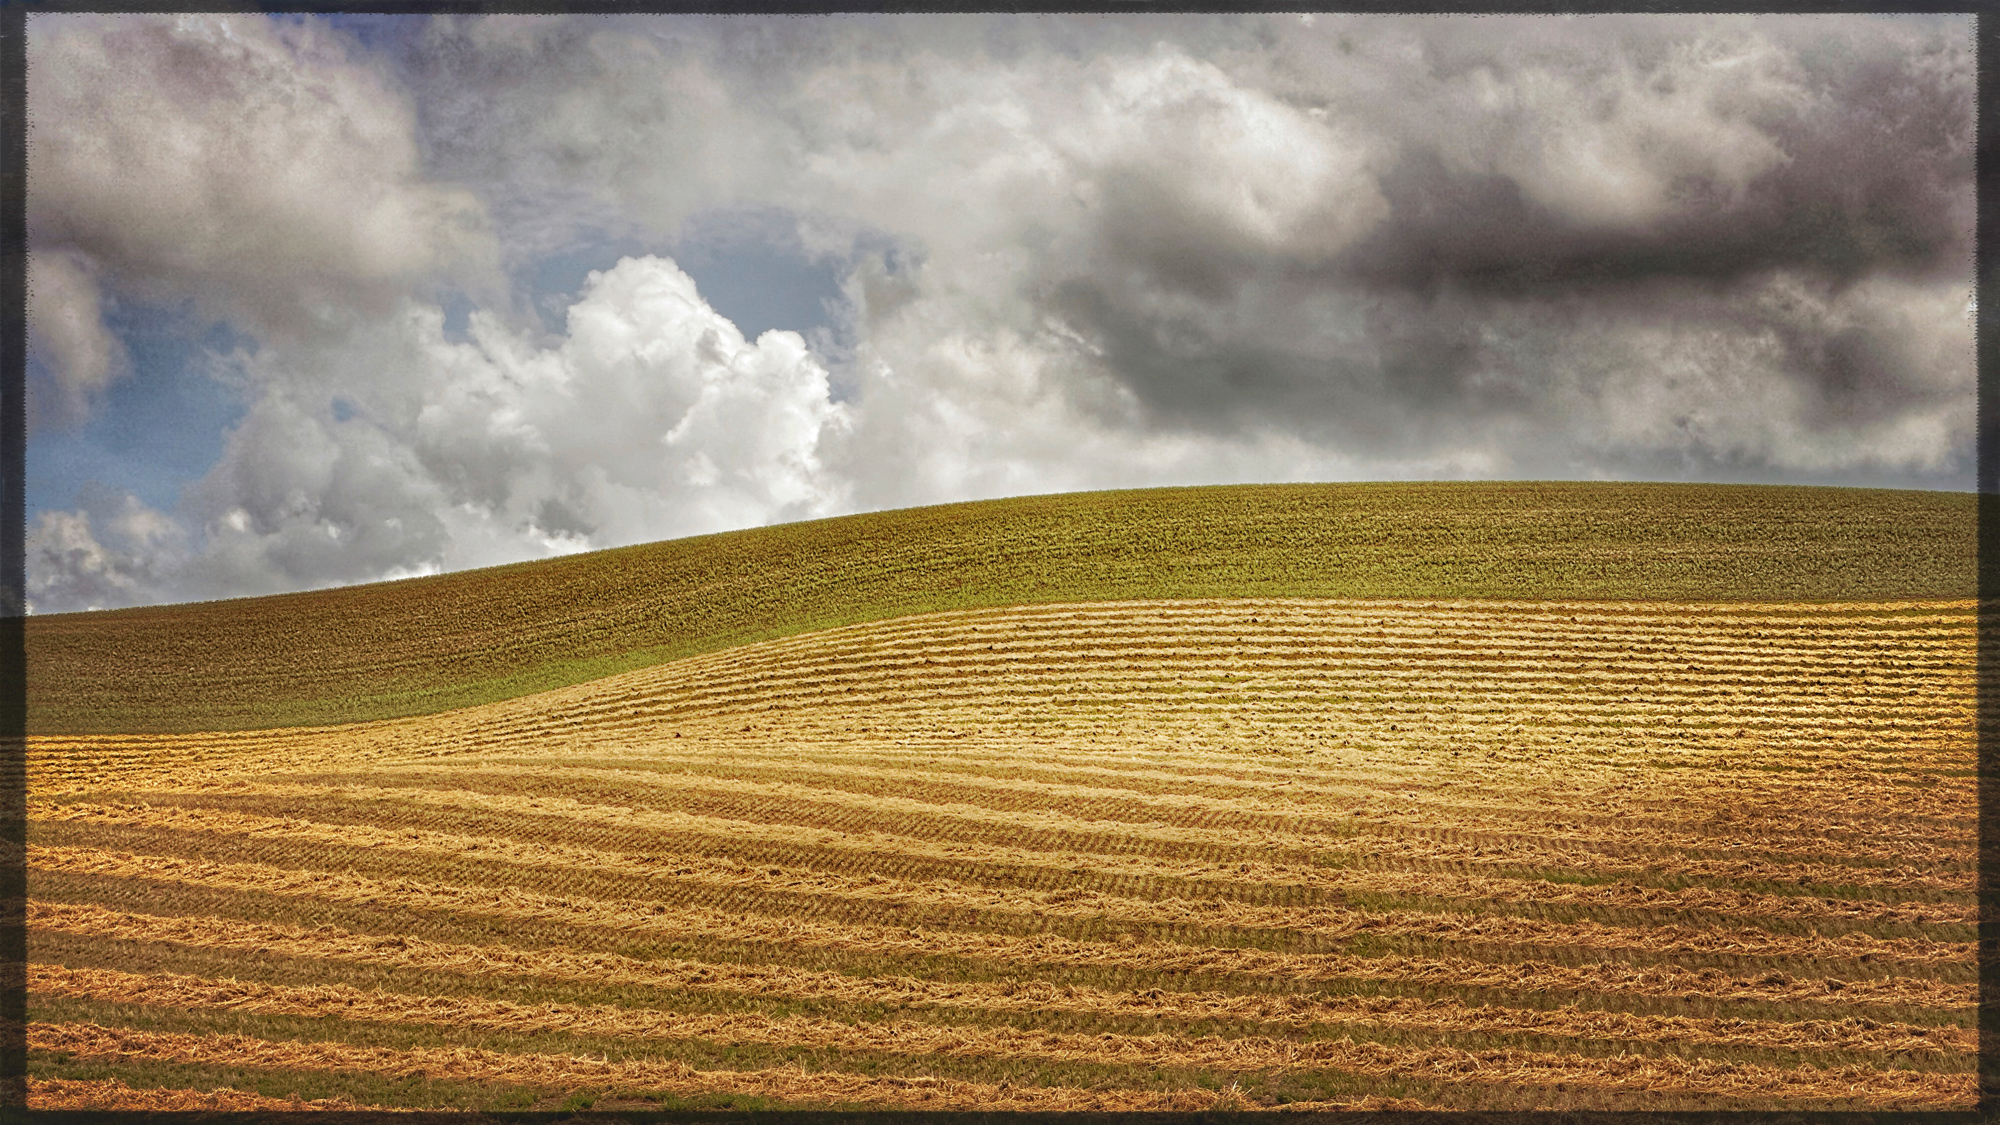 In this shot and the next I tried to find a balance of the curves of the hills, the plow lines and sky.  I like this one.